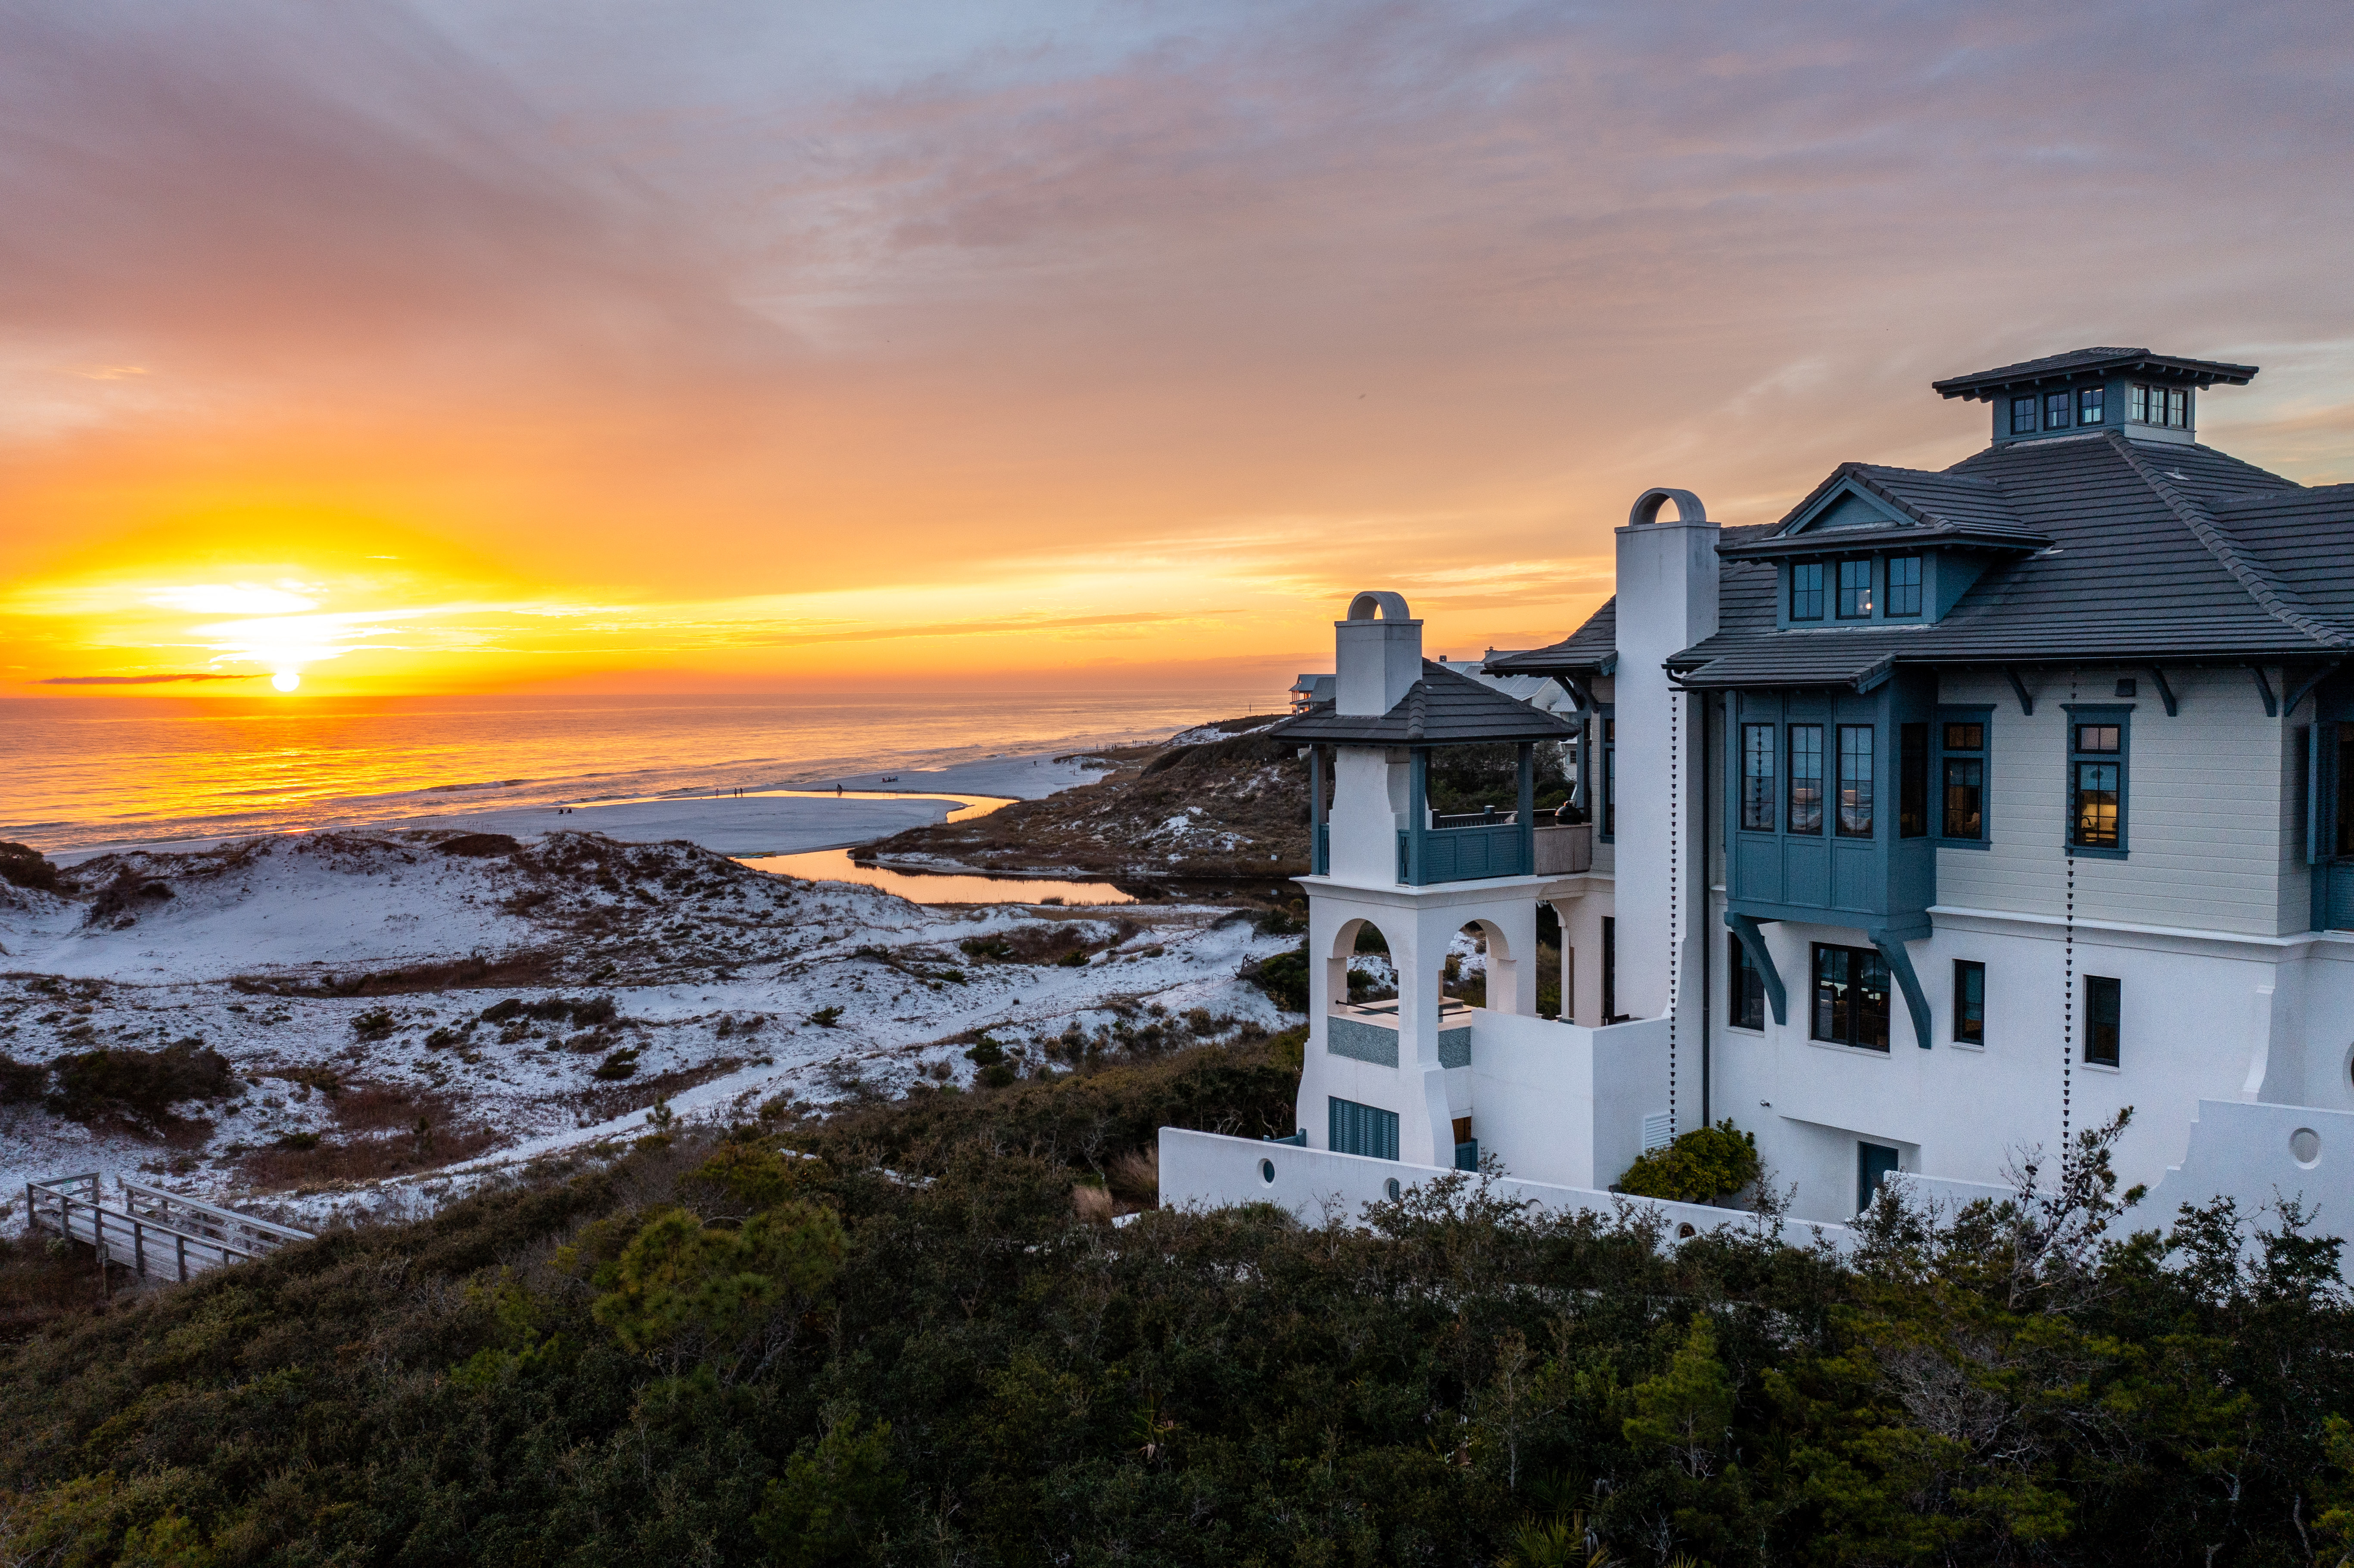 A view of a pinnacle home in The Retreat overlooking the private beach and gulf at sunset